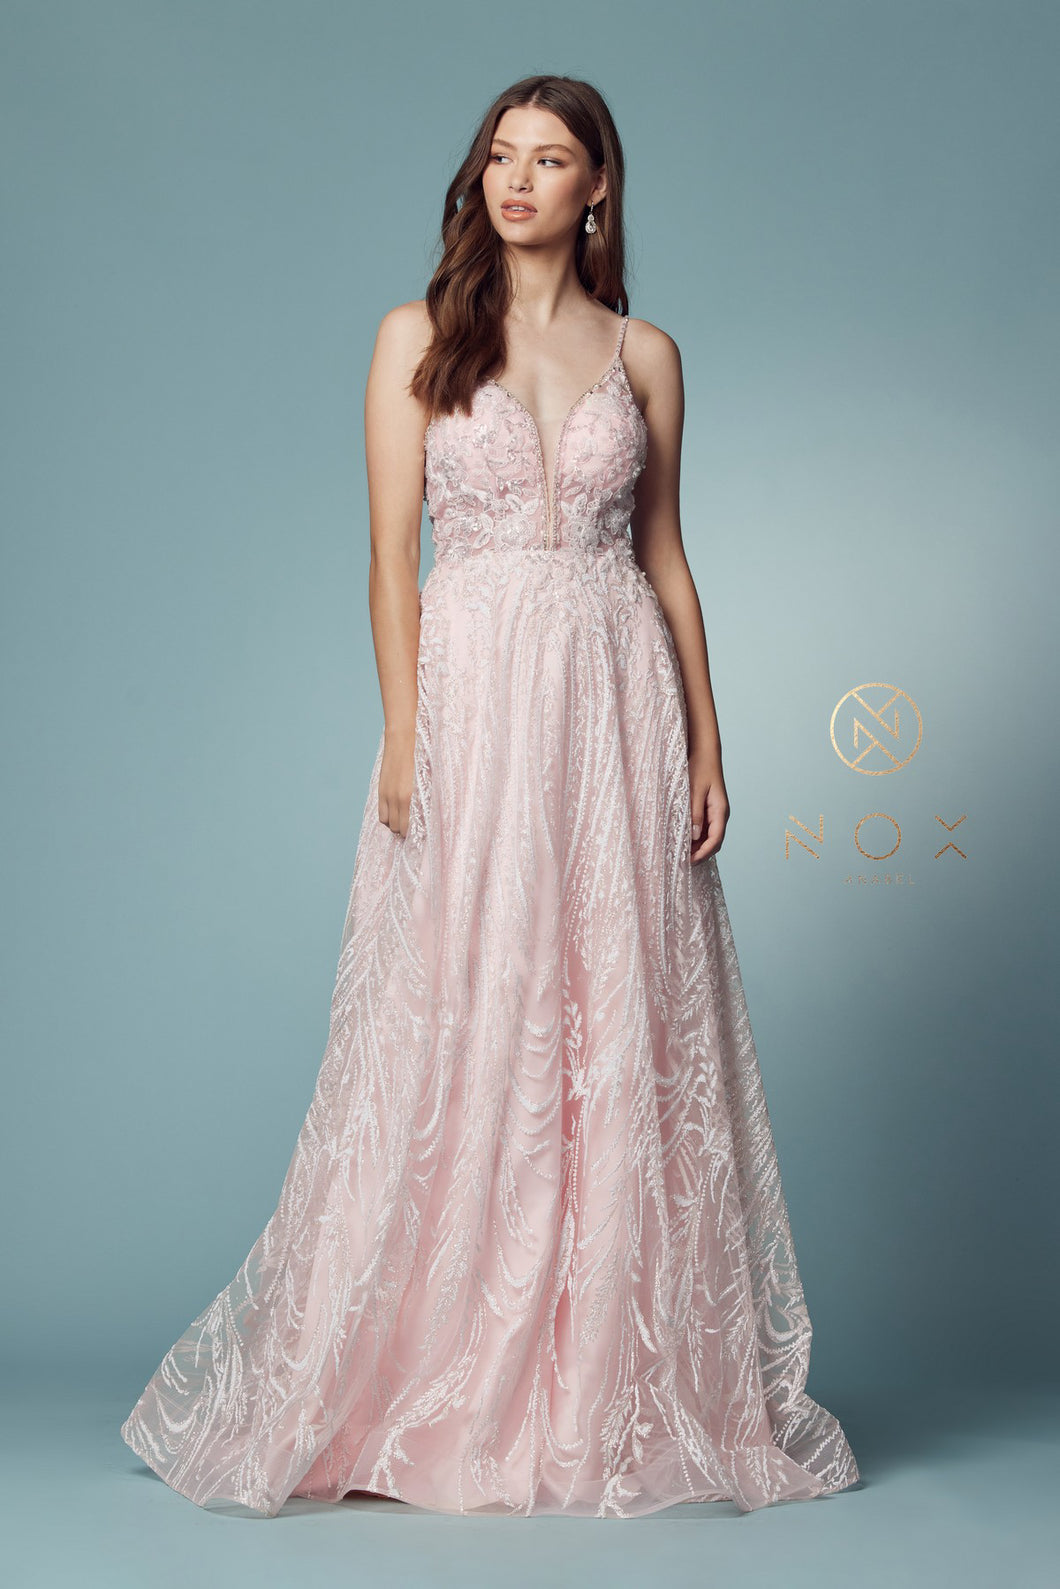 N T1009 - Illusion Deep V-Neck Prom Gown with Glitter Embellished Lace & Low Open Back Prom Dress Nox 2 PINK 